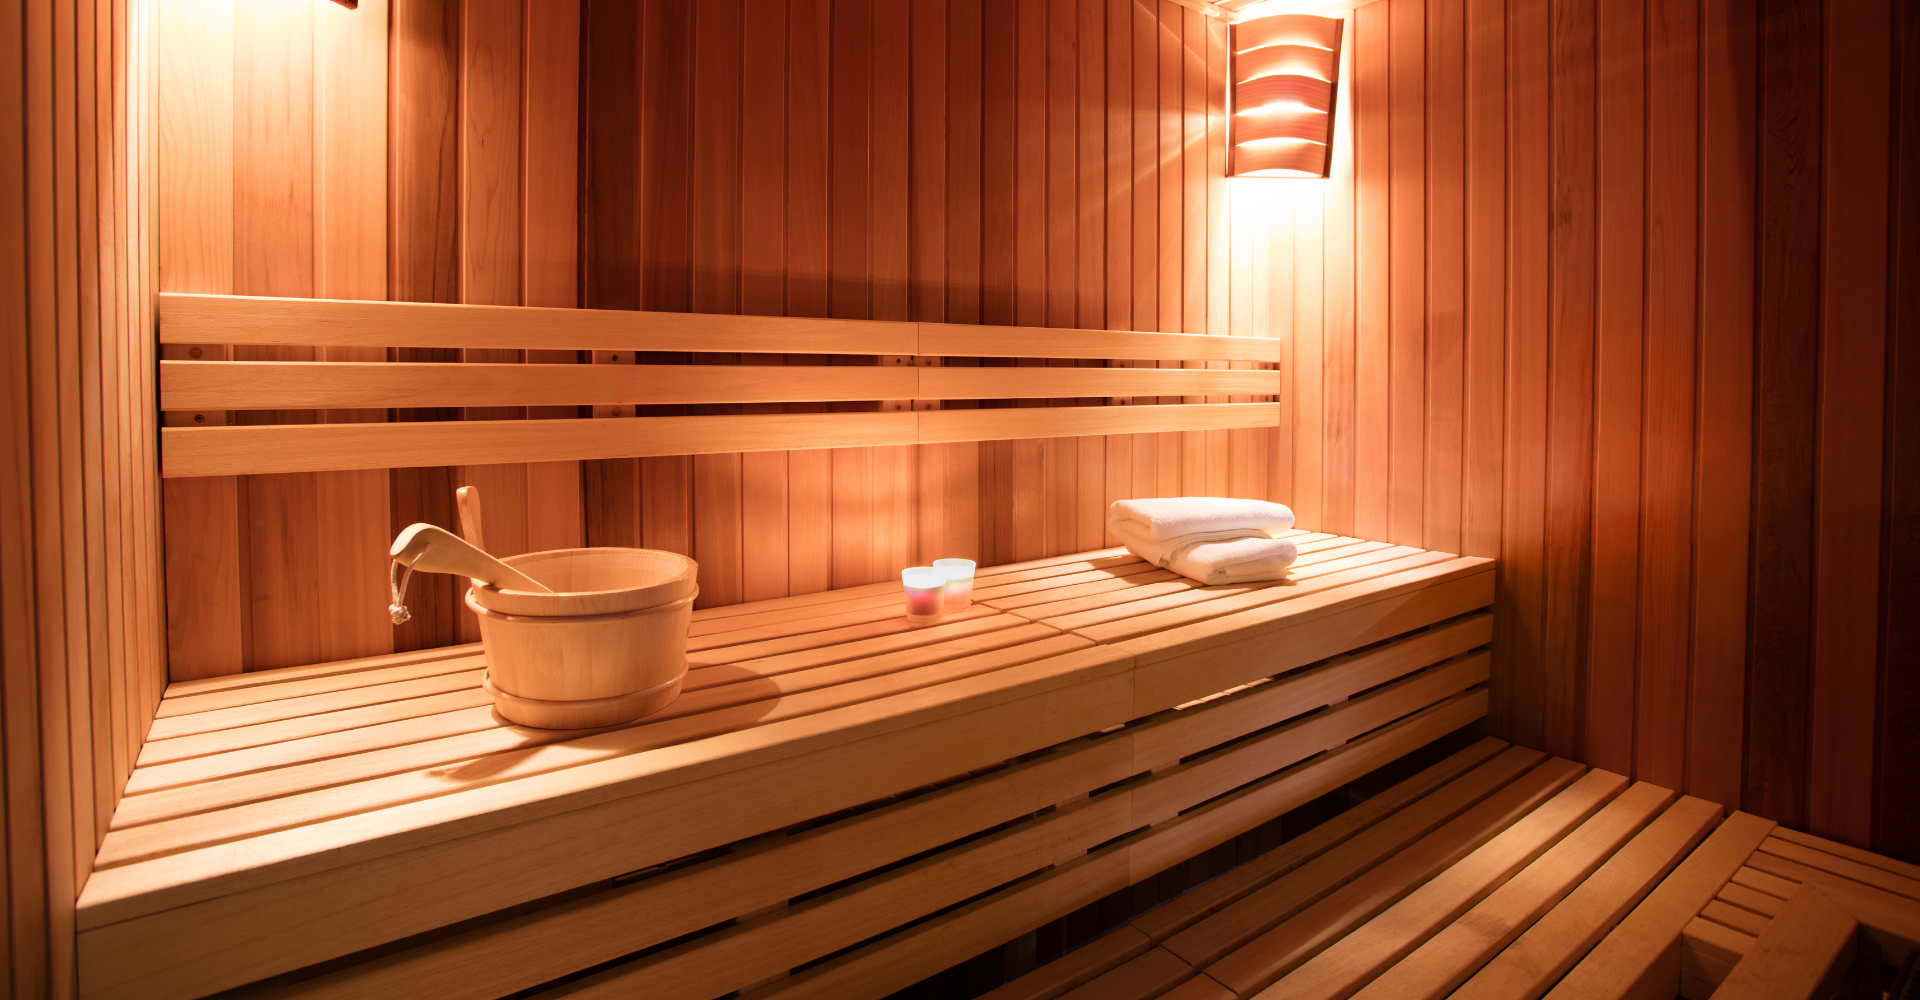 The Cardiovascular Benefits of Sauna Bathing: Improving Heart Health and Reducing High Blood Pressure